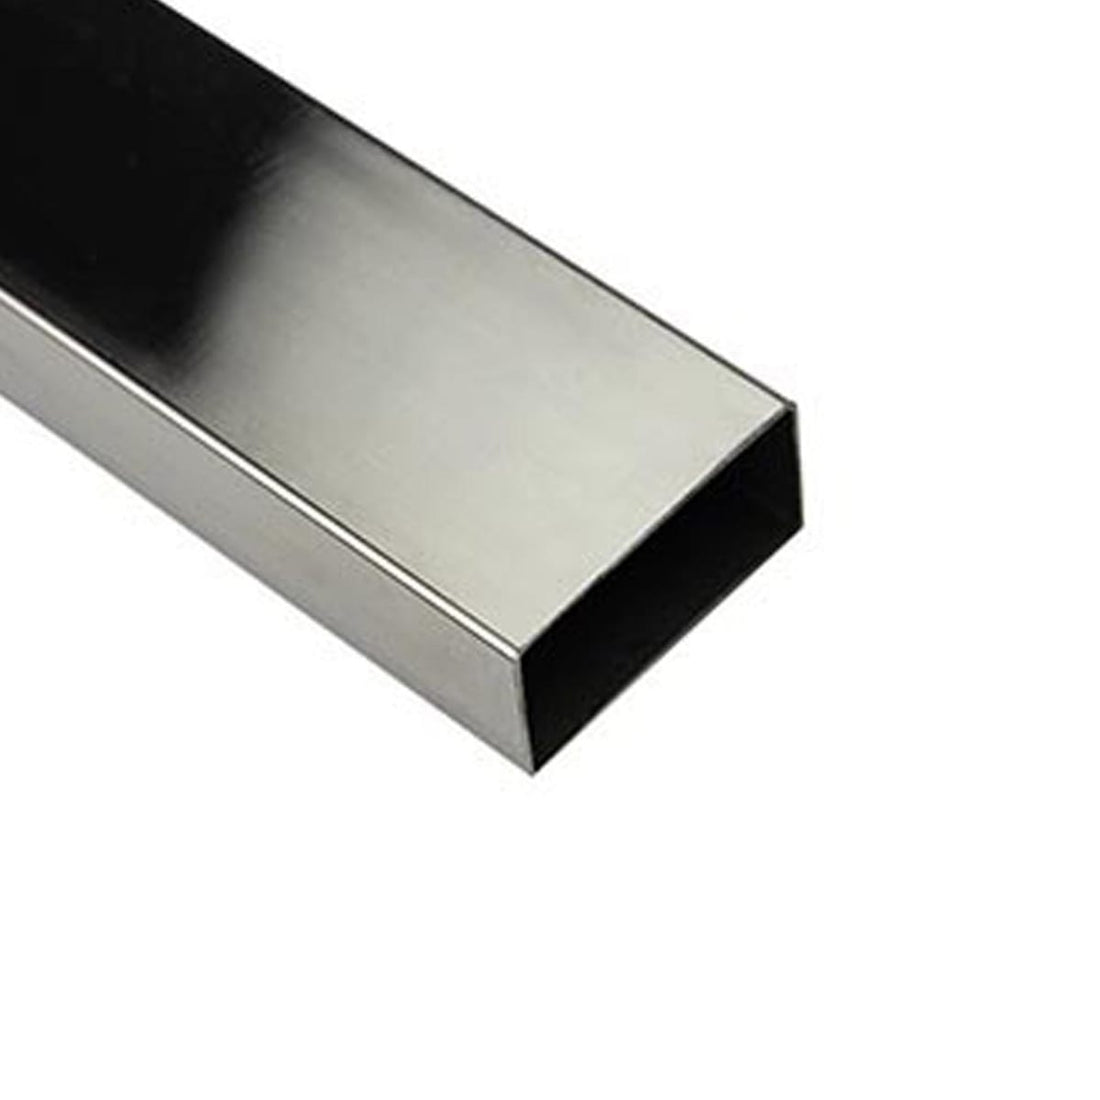 RECTANGULAR PROFILE 20X10X0.5MM 2MT STAINLESS STEEL AISI 304